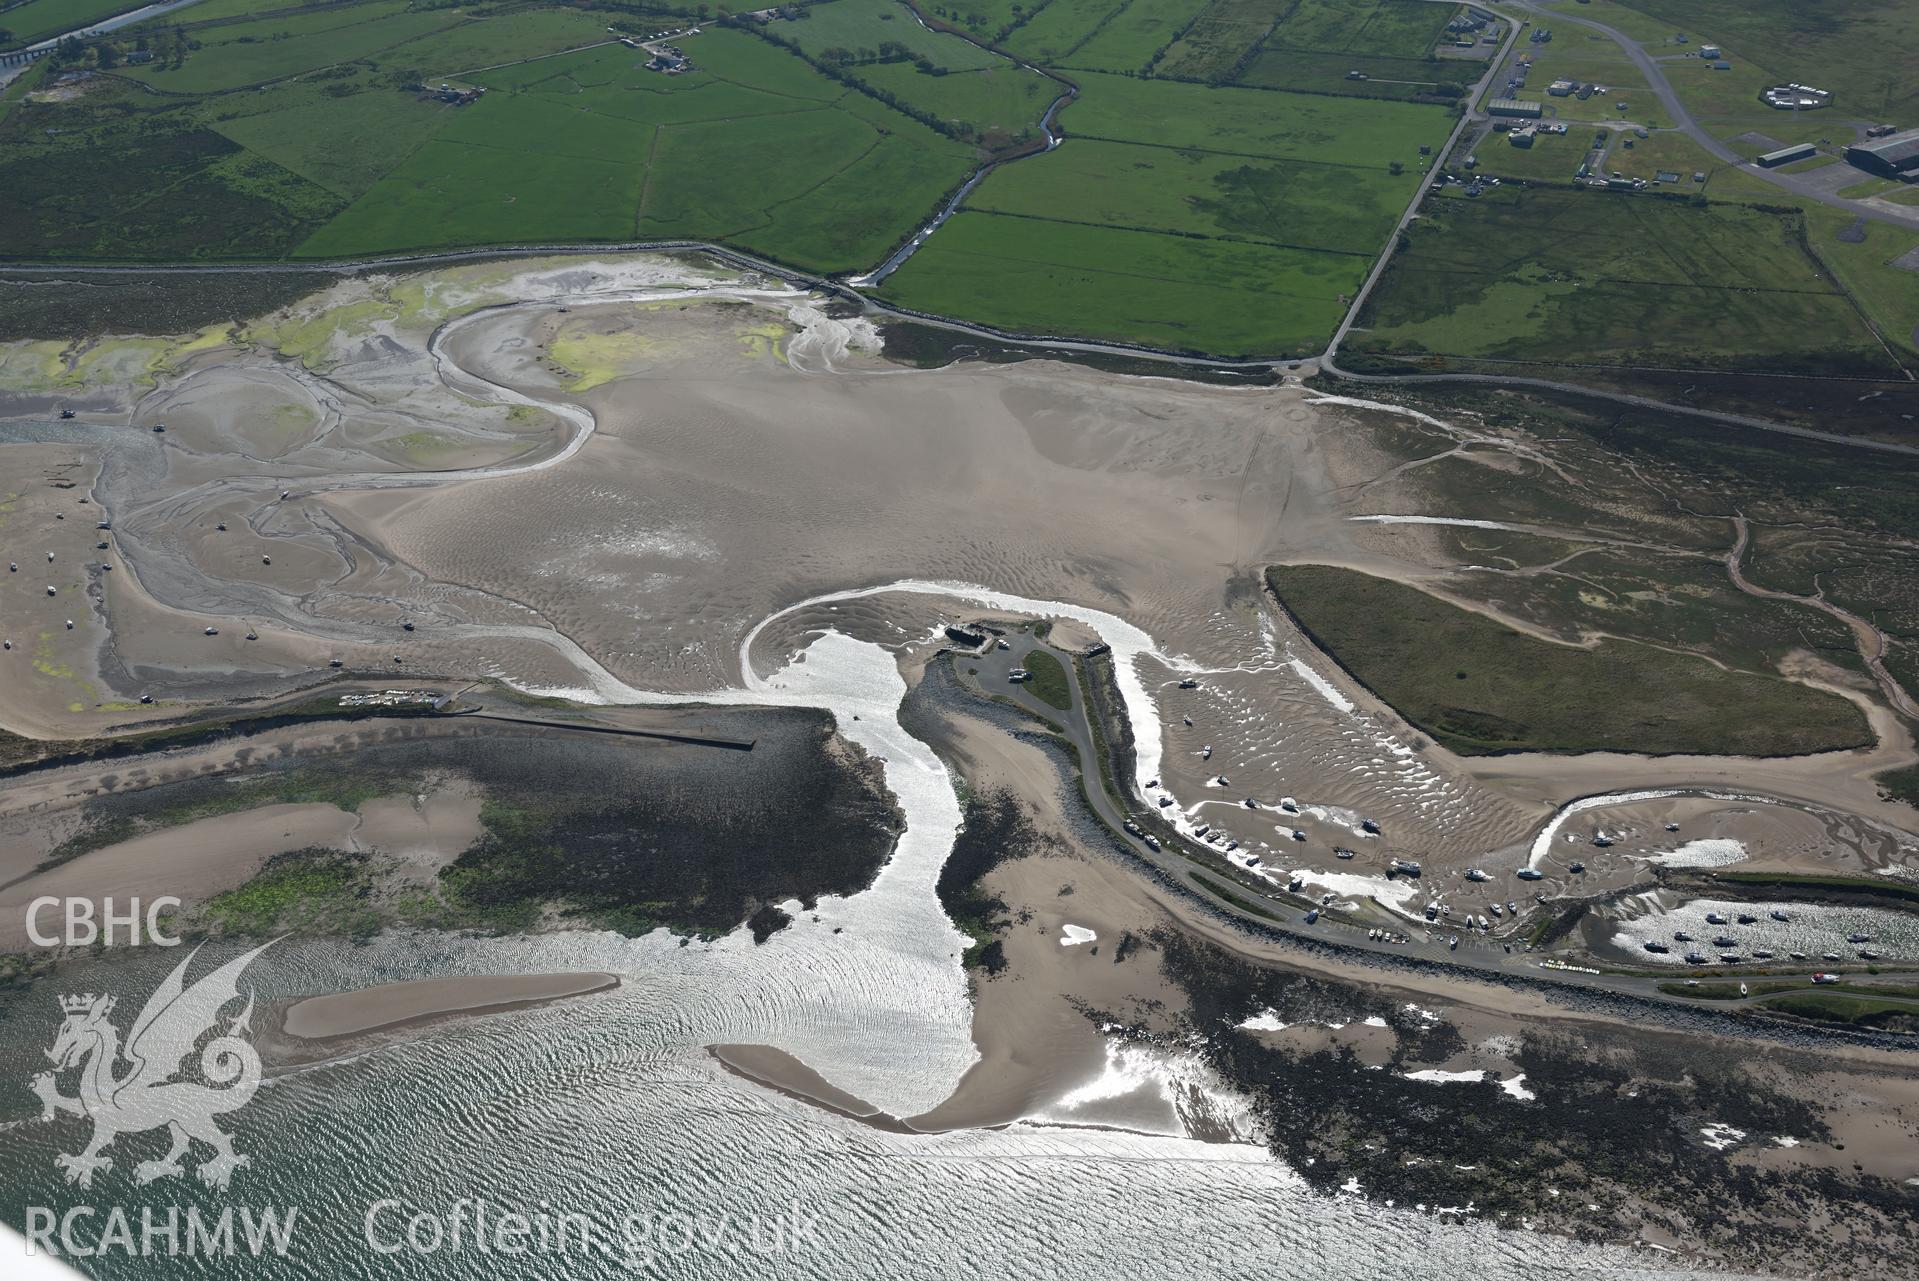 Aerial photography of Shell Island taken on 3rd May 2017.  Baseline aerial reconnaissance survey for the CHERISH Project. ? Crown: CHERISH PROJECT 2017. Produced with EU funds through the Ireland Wales Co-operation Programme 2014-2020. All material made freely available through the Open Government Licence.